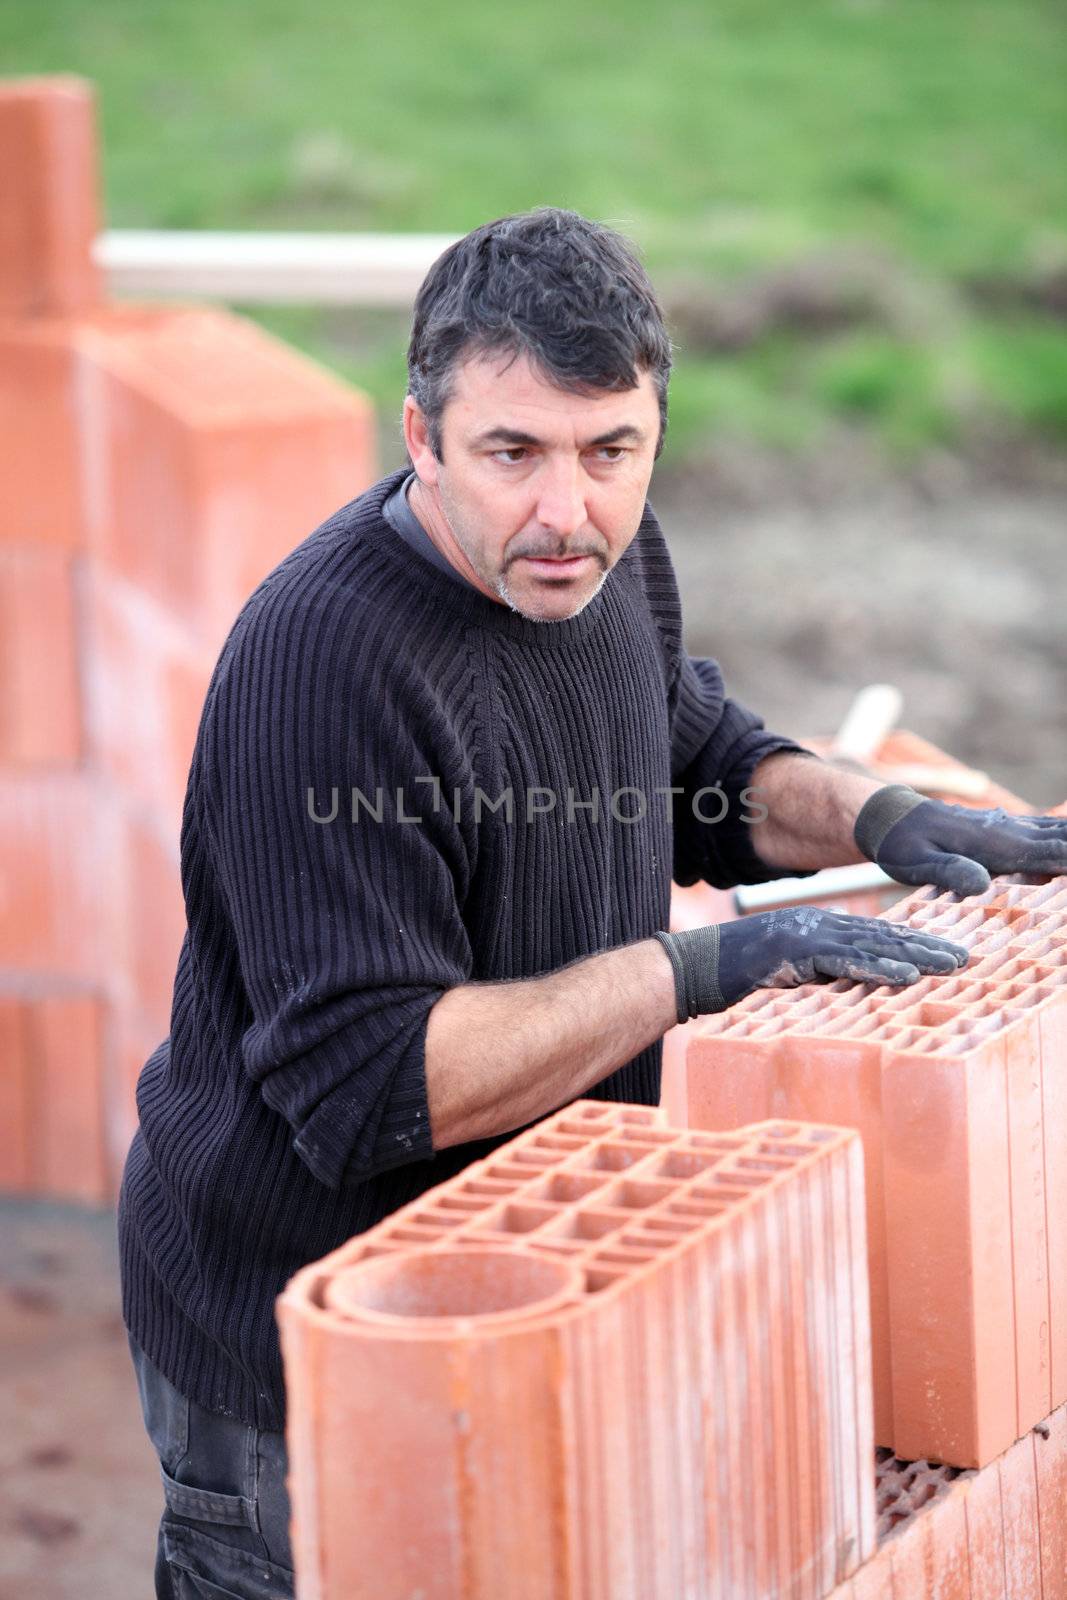 A hard-working bricklayer by phovoir